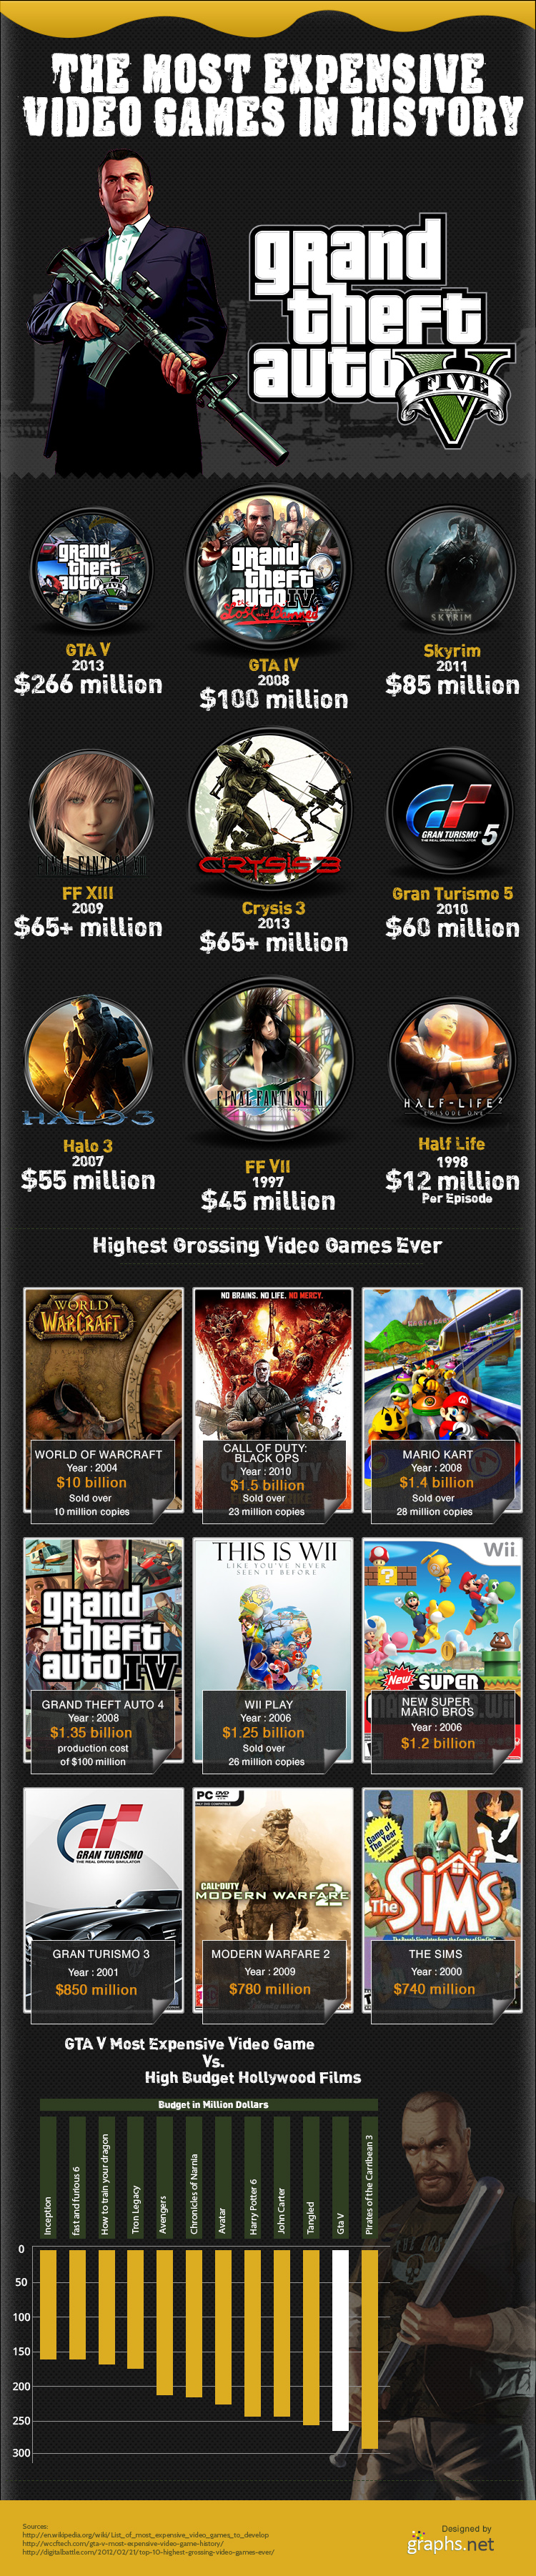 Most-expensive-video-games-infographic